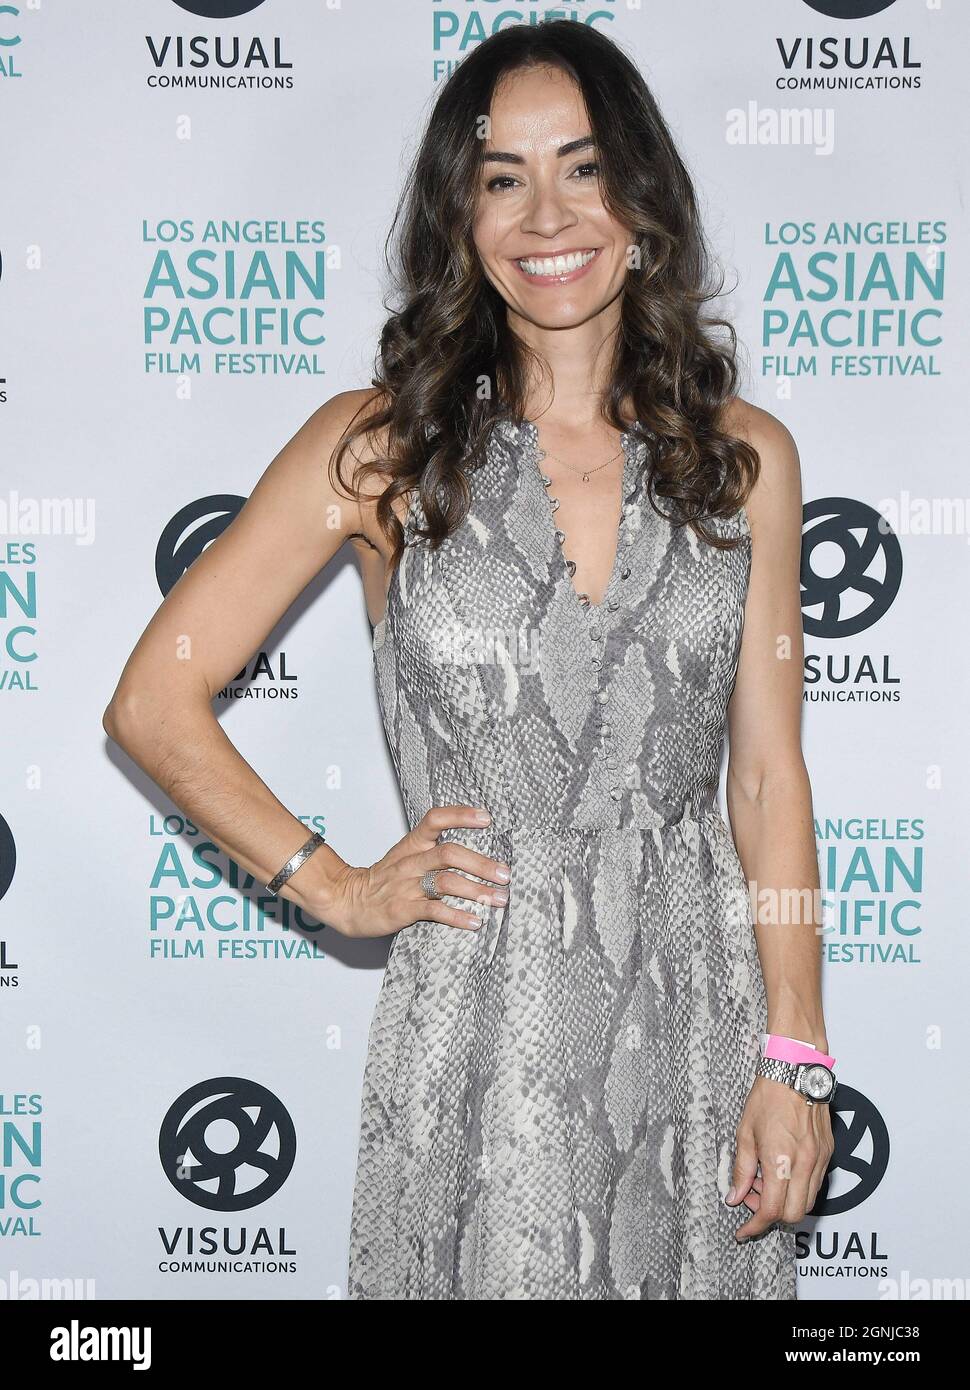 Los Angeles, USA. 25th Sep, 2021. Presciliana Esparolini arrives at the 2021 Los Angeles Asian Pacific Film Festival - THE DISAPPEARANCE OF MRS. WU Screening held at the Regal LA Live in Los Angeles, CA on Saturday, ?September 25, 2021. (Photo By Sthanlee B. Mirador/Sipa USA) Credit: Sipa USA/Alamy Live News Stock Photo